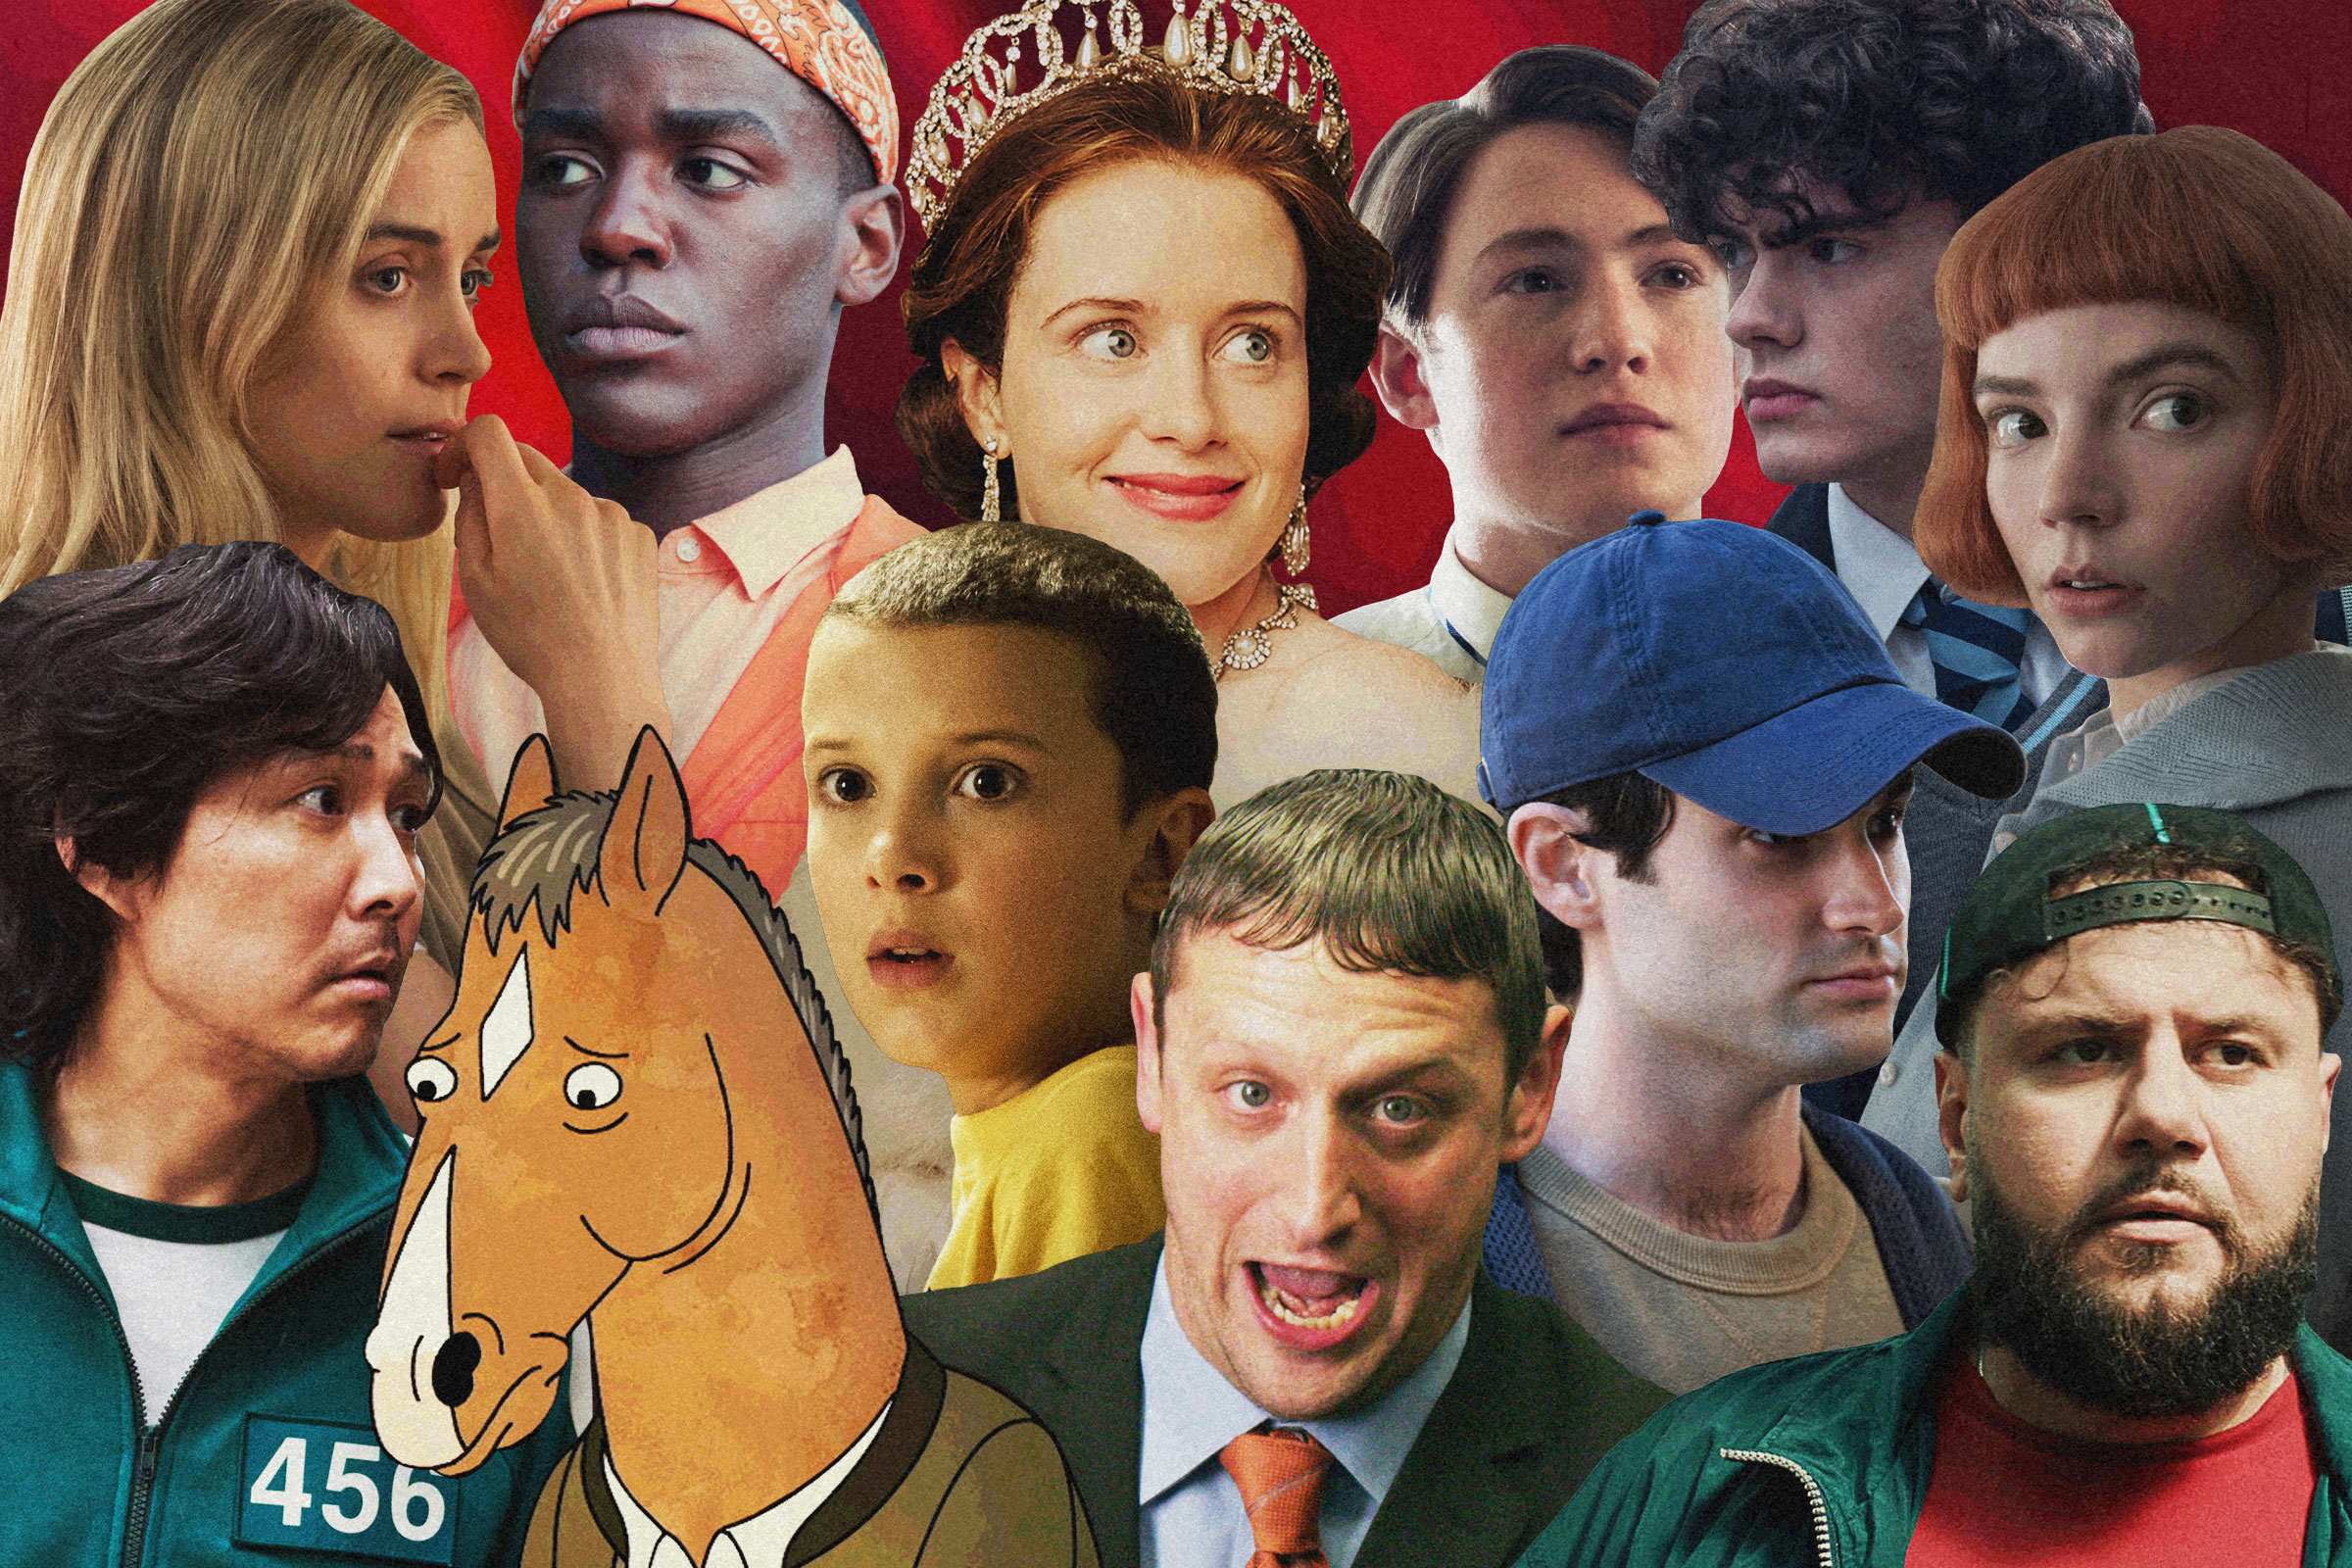 A collage of cut outs of different characters from popular Netflix shows